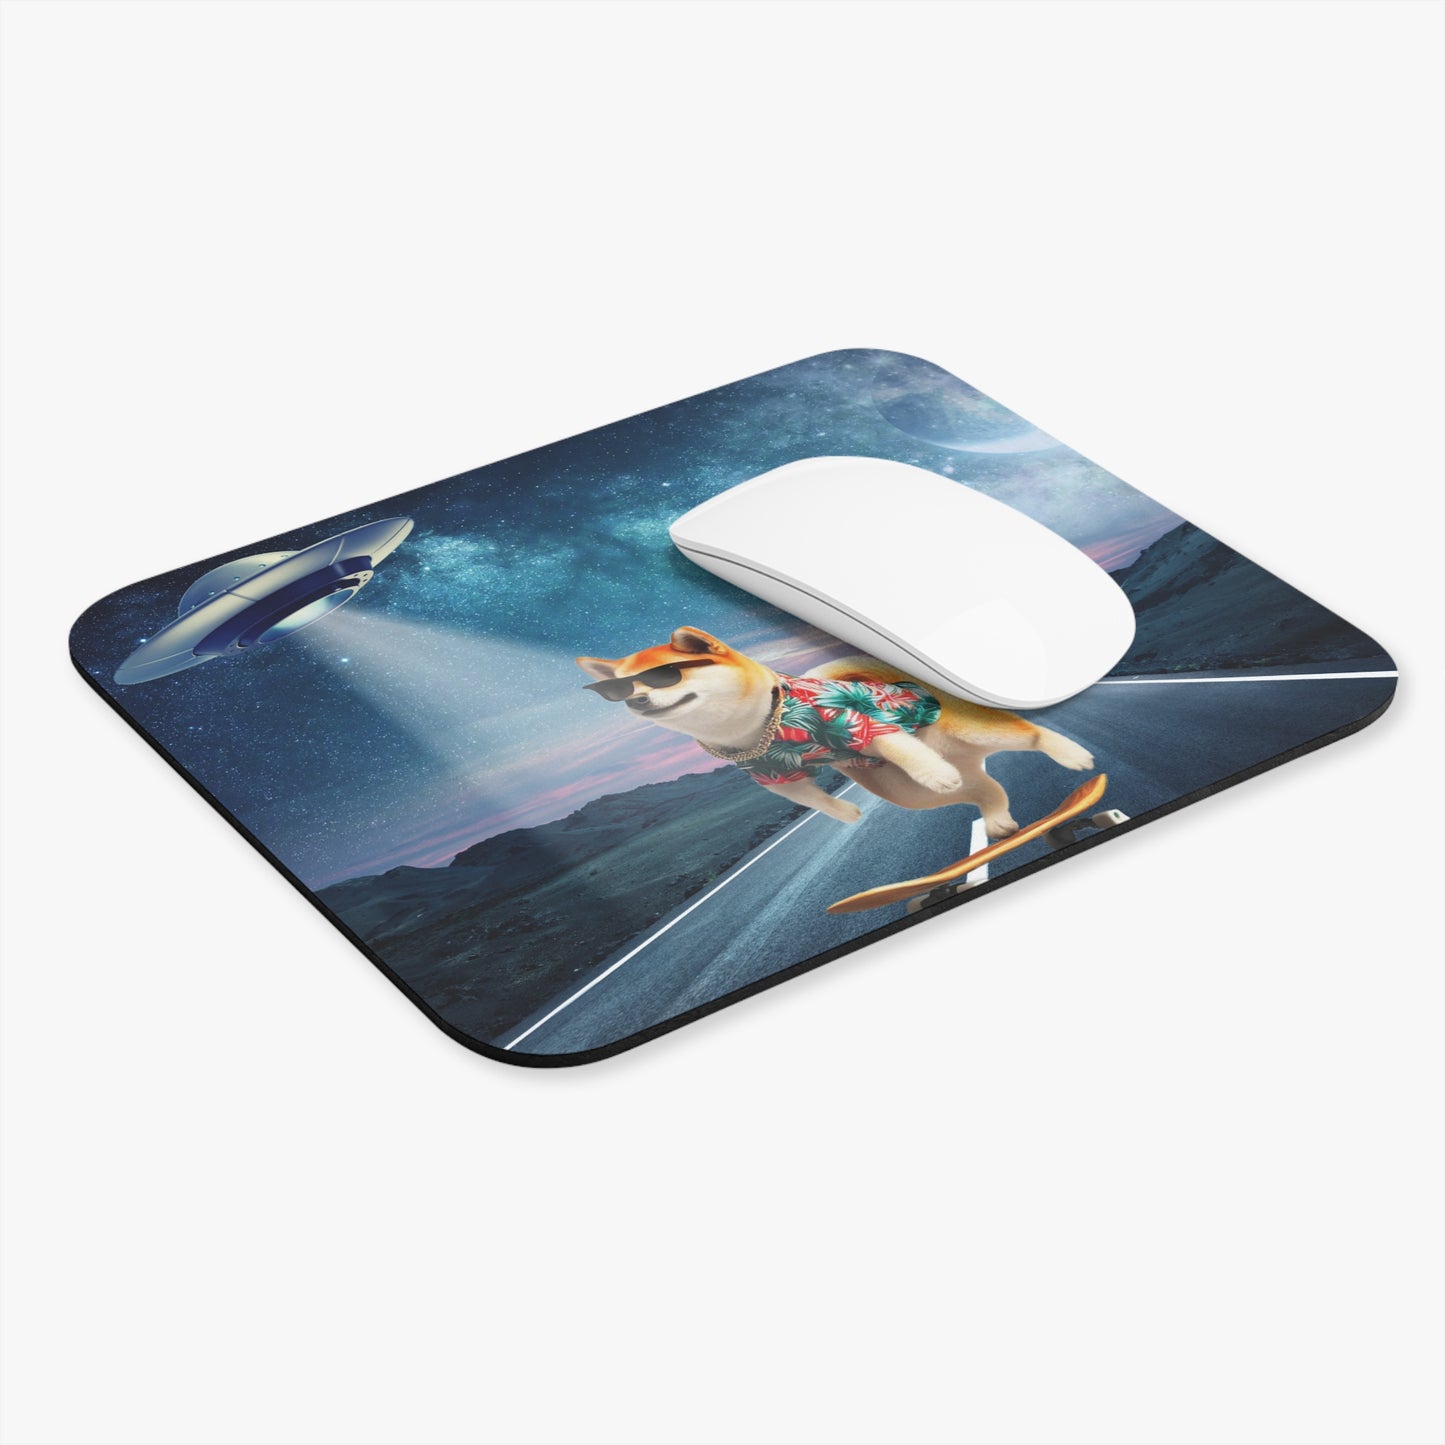 Another UFO Abduction Mouse Pad